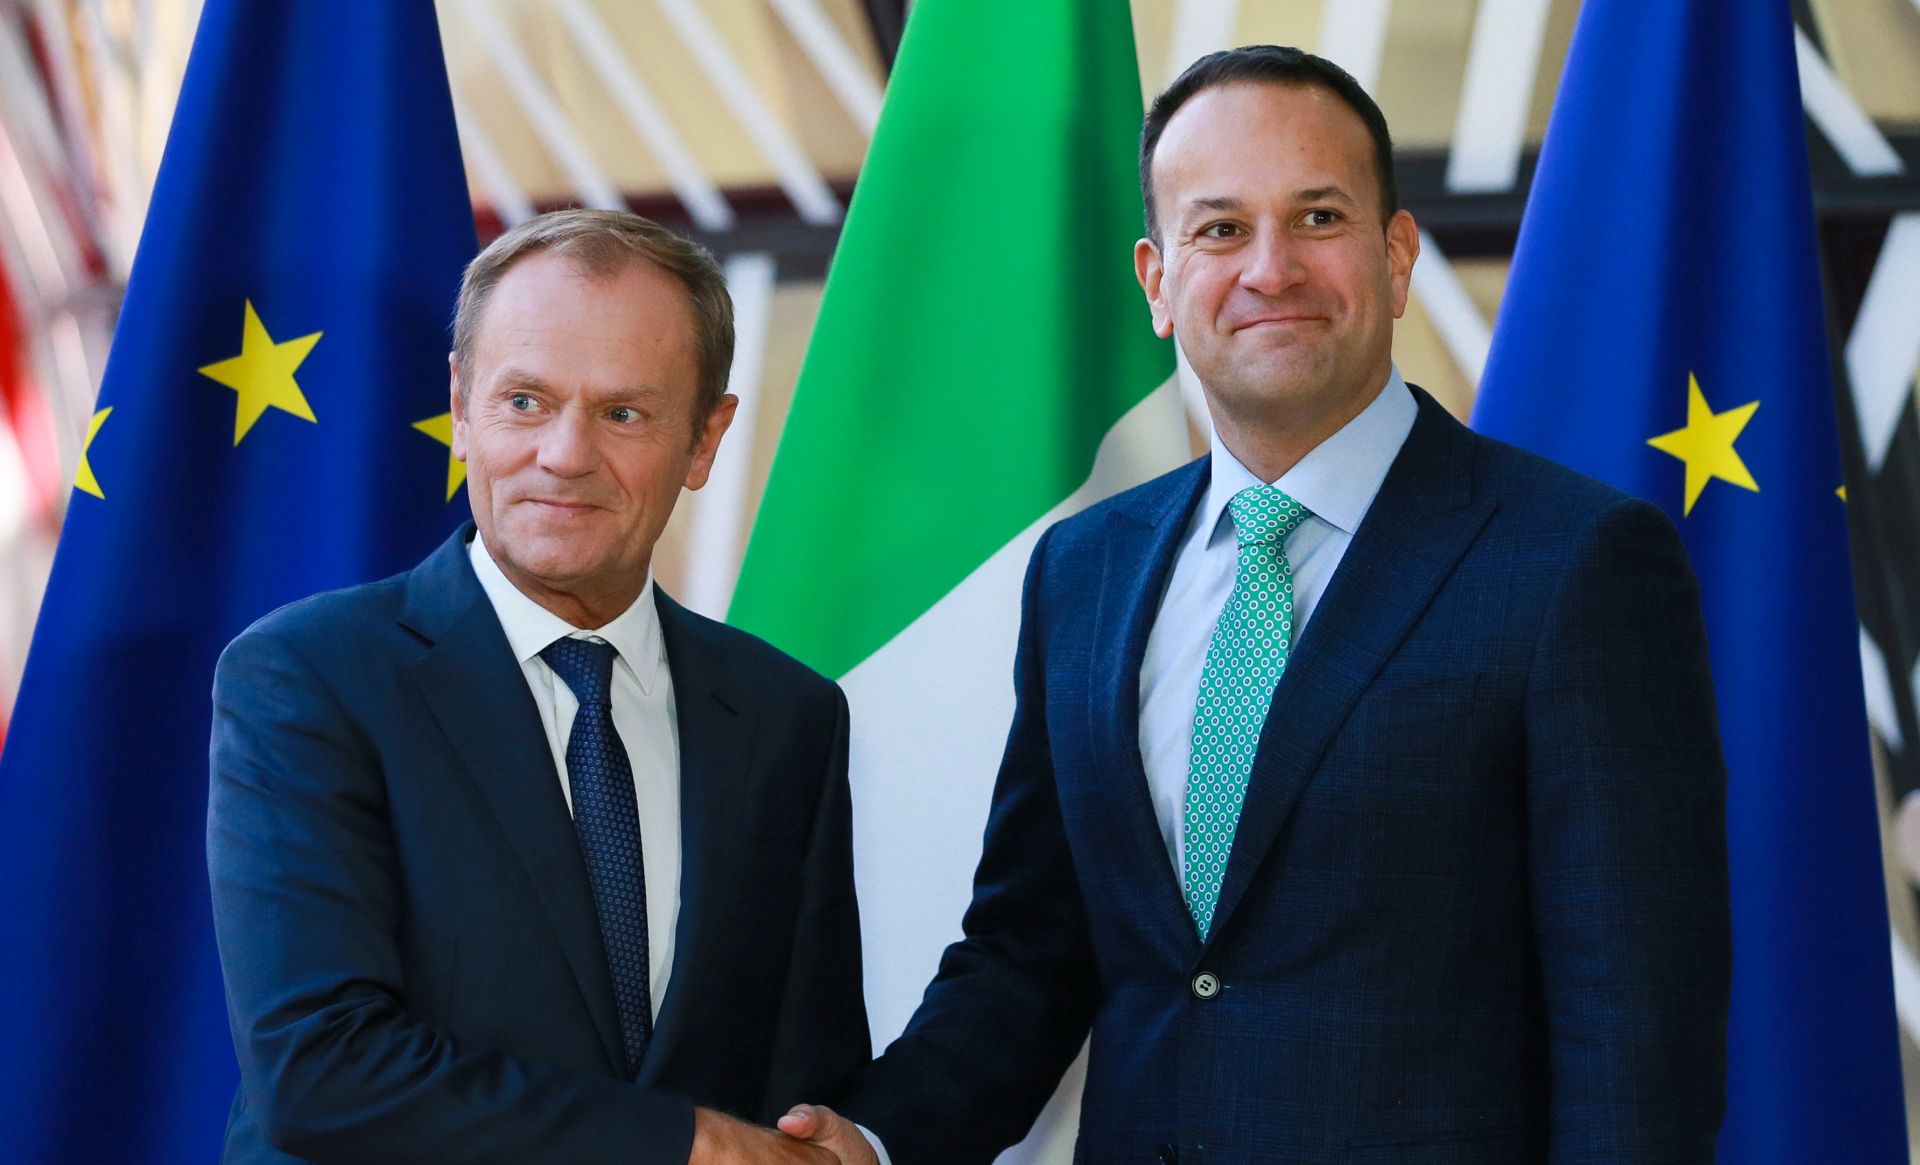 epa07068774 The Taoiseach of Ireland (Prime Minister) Leo Varadkar (R) is welcomed by European Union Council President Donald Tusk (L) ahead of a meeting in Brussels, Belgium, 04 October 2018.  EPA/STEPHANIE LECOCQ